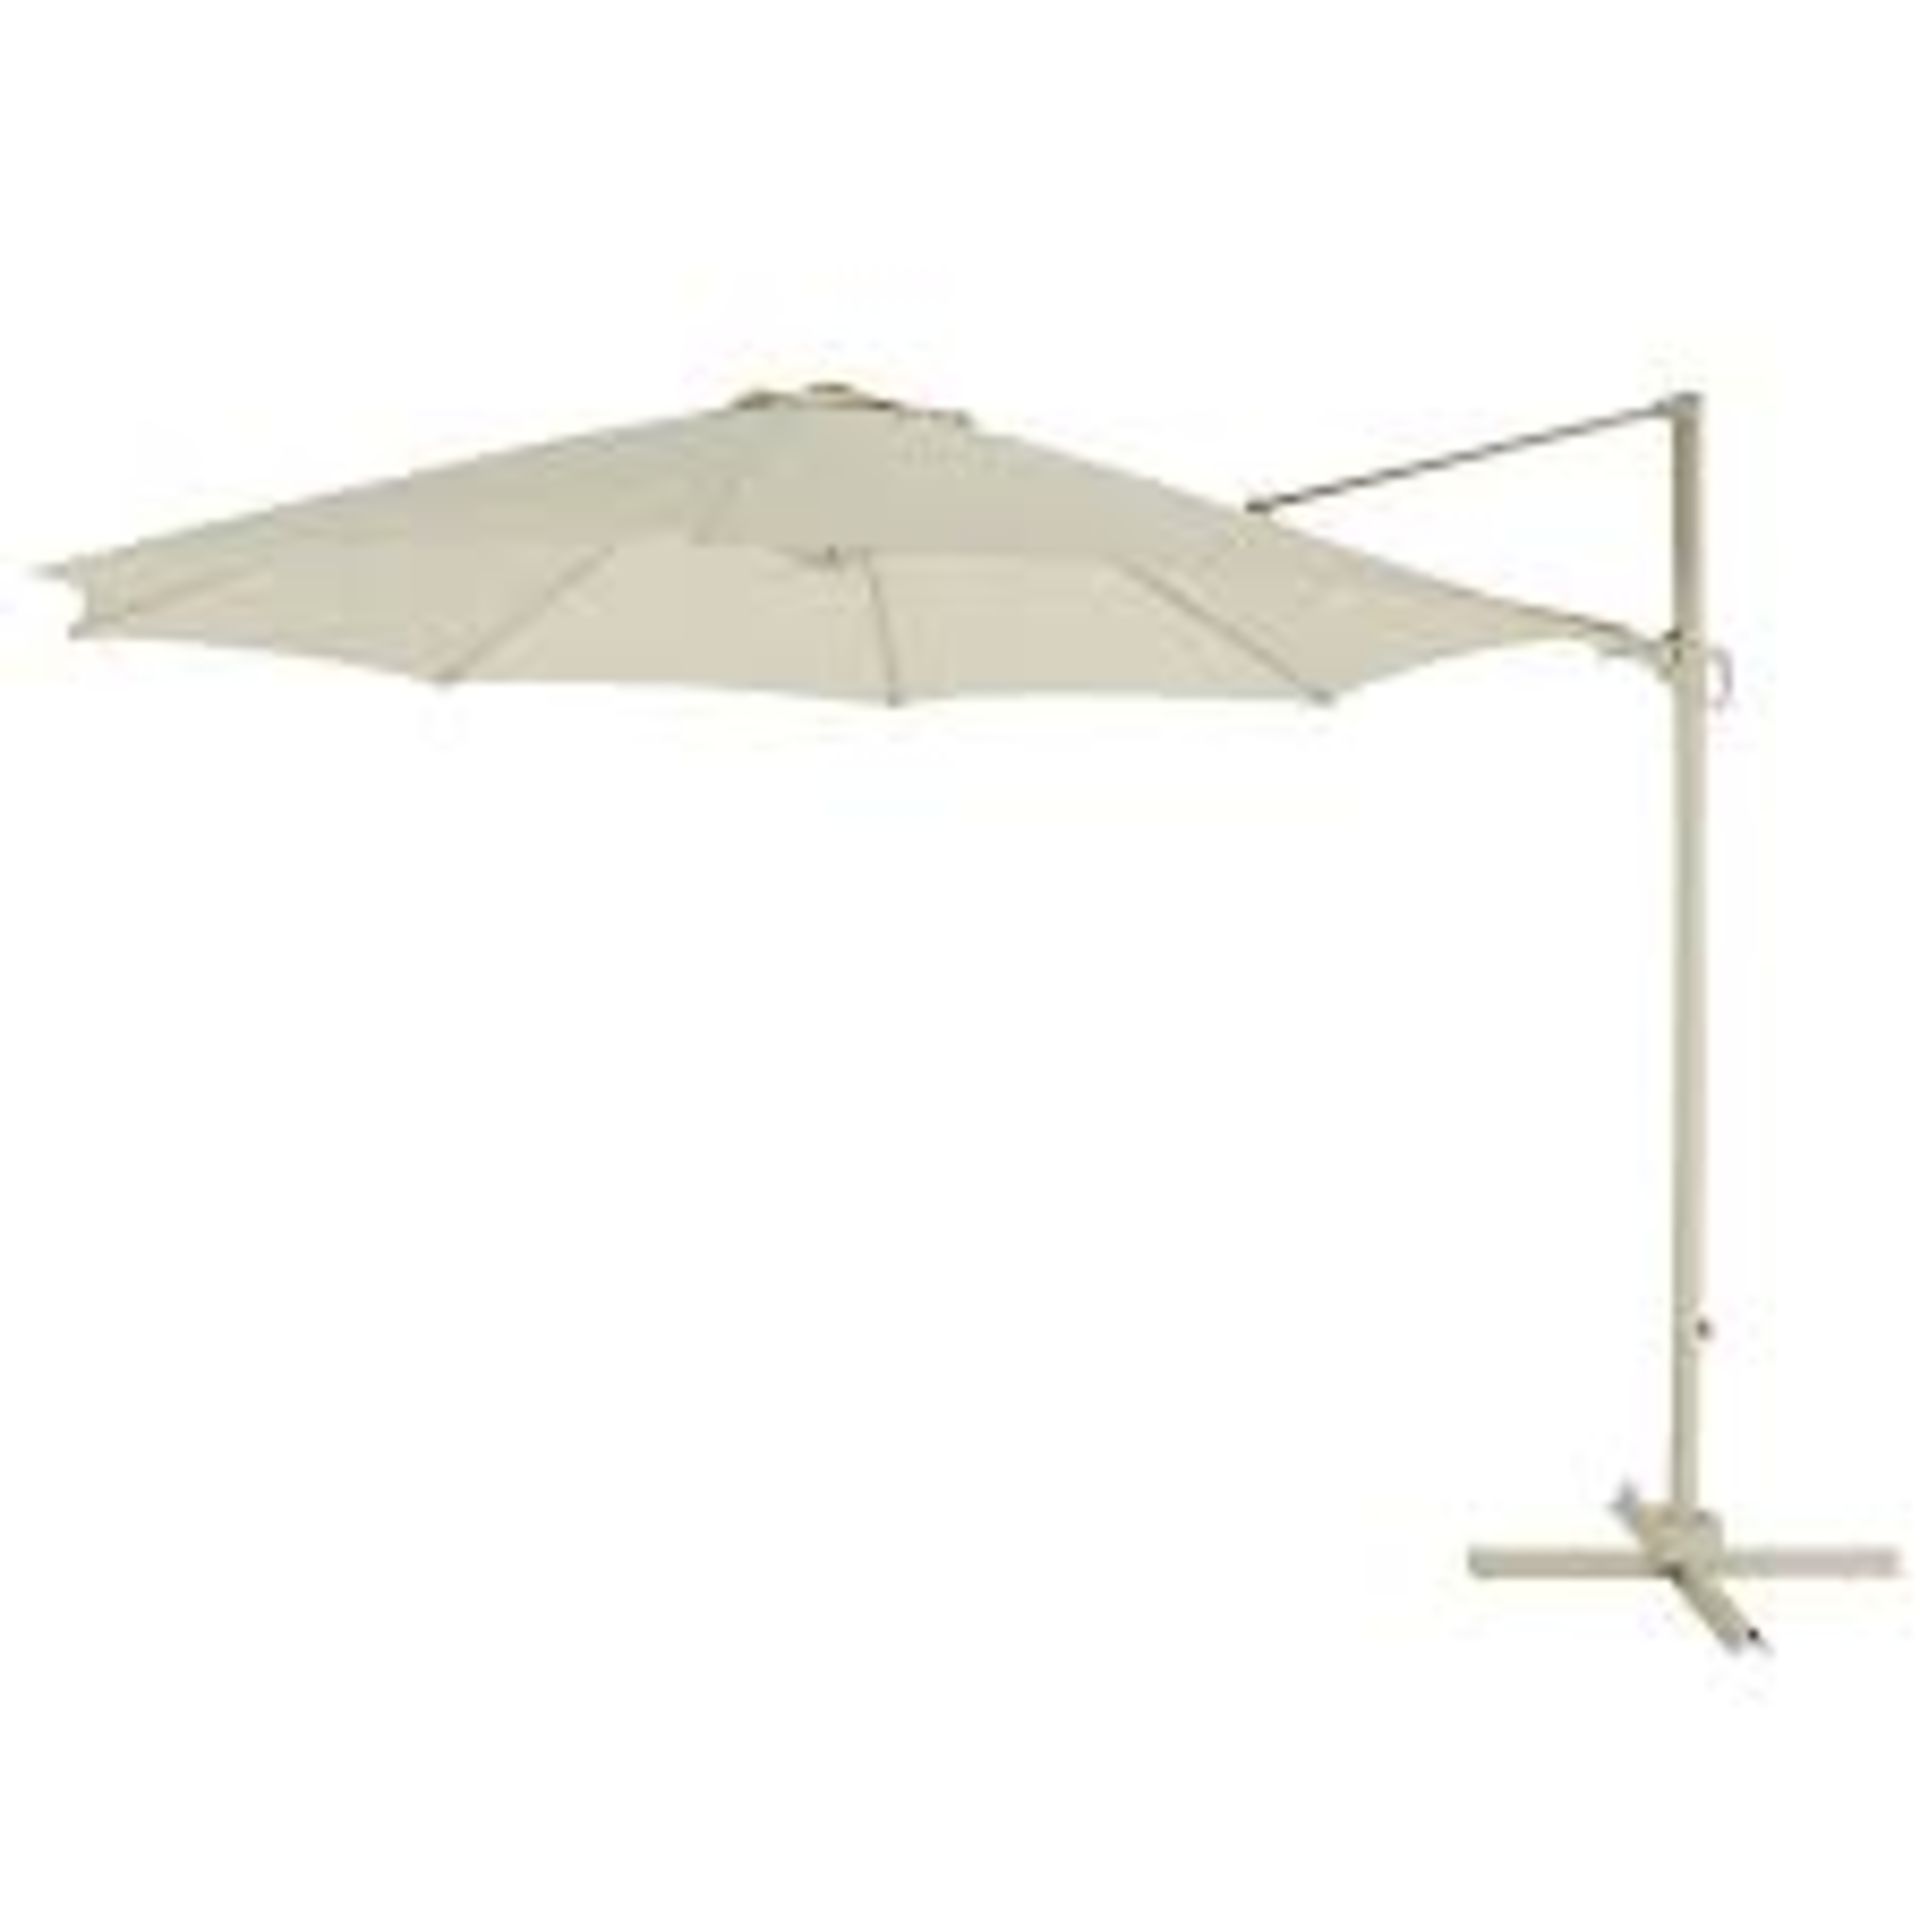 GoodHome Mallorca 3.46m Sand Overhanging parasol. - R13a.12.